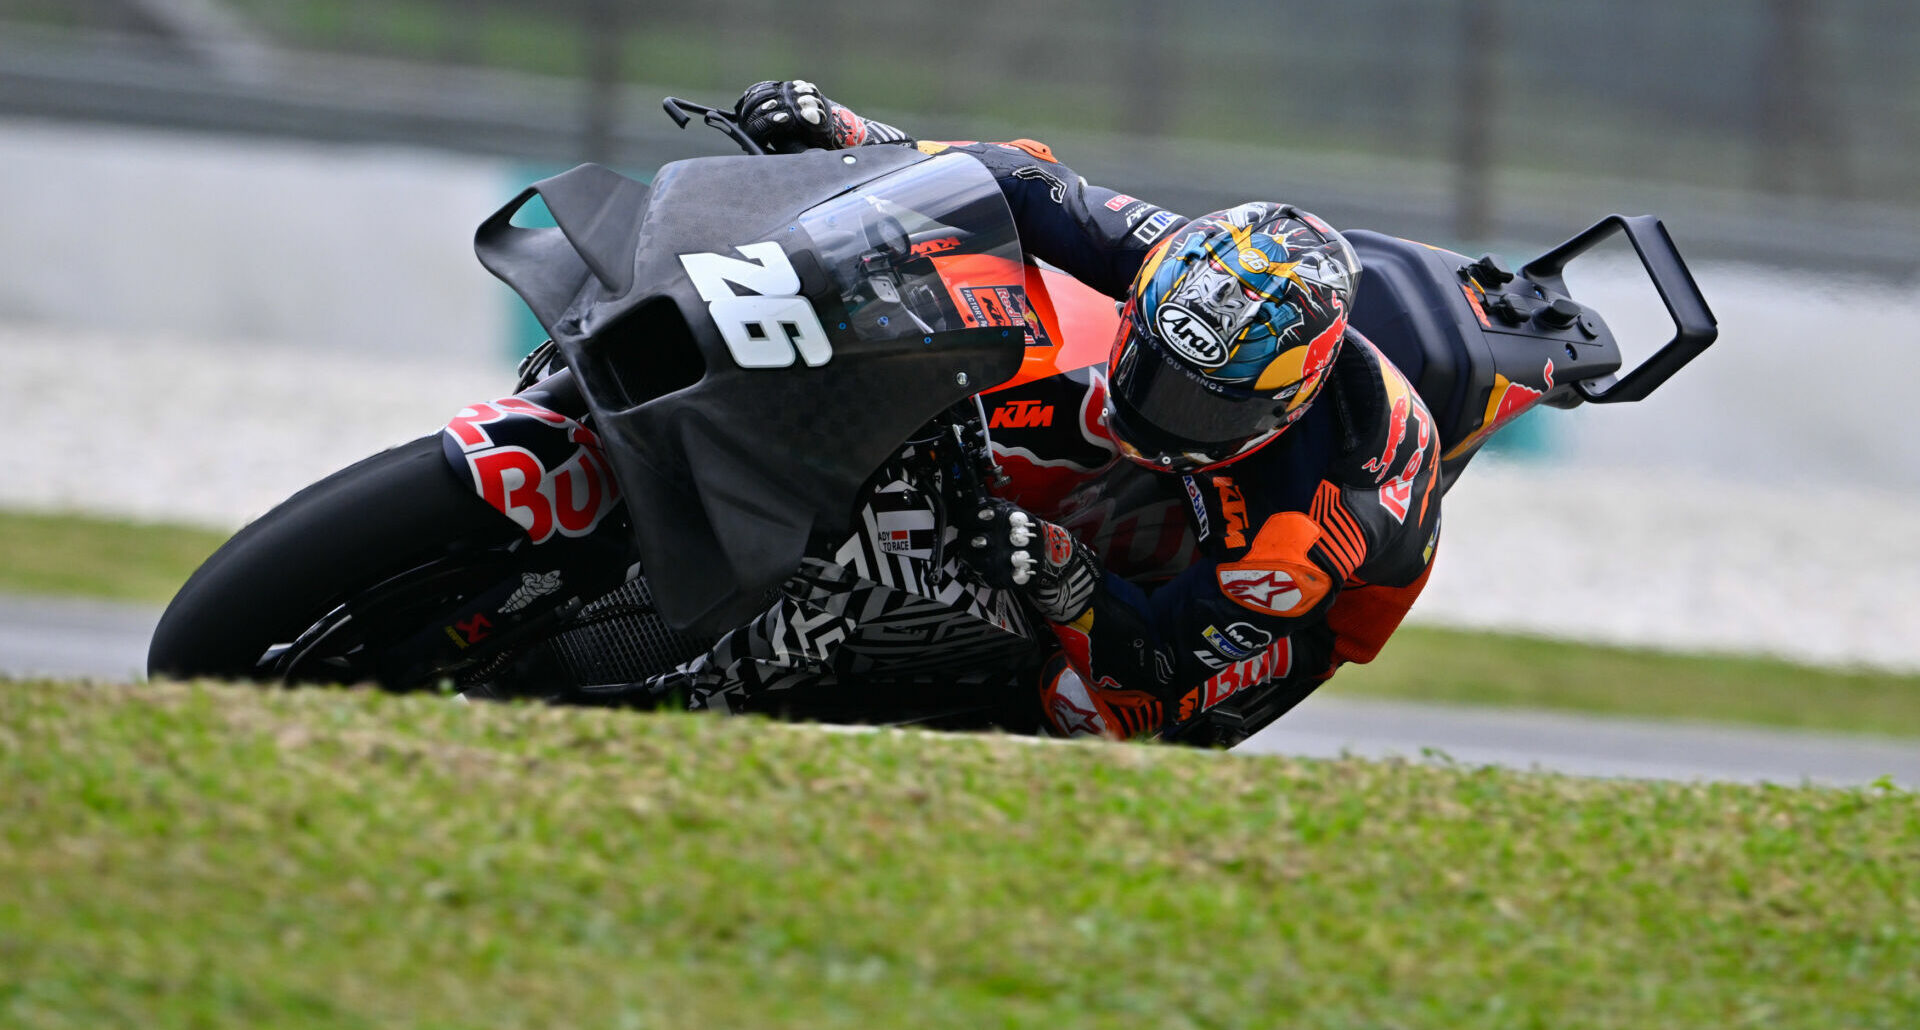 KTM test rider Dani Pedrosa (26) was the quickest rider during Day One of the MotoGP 